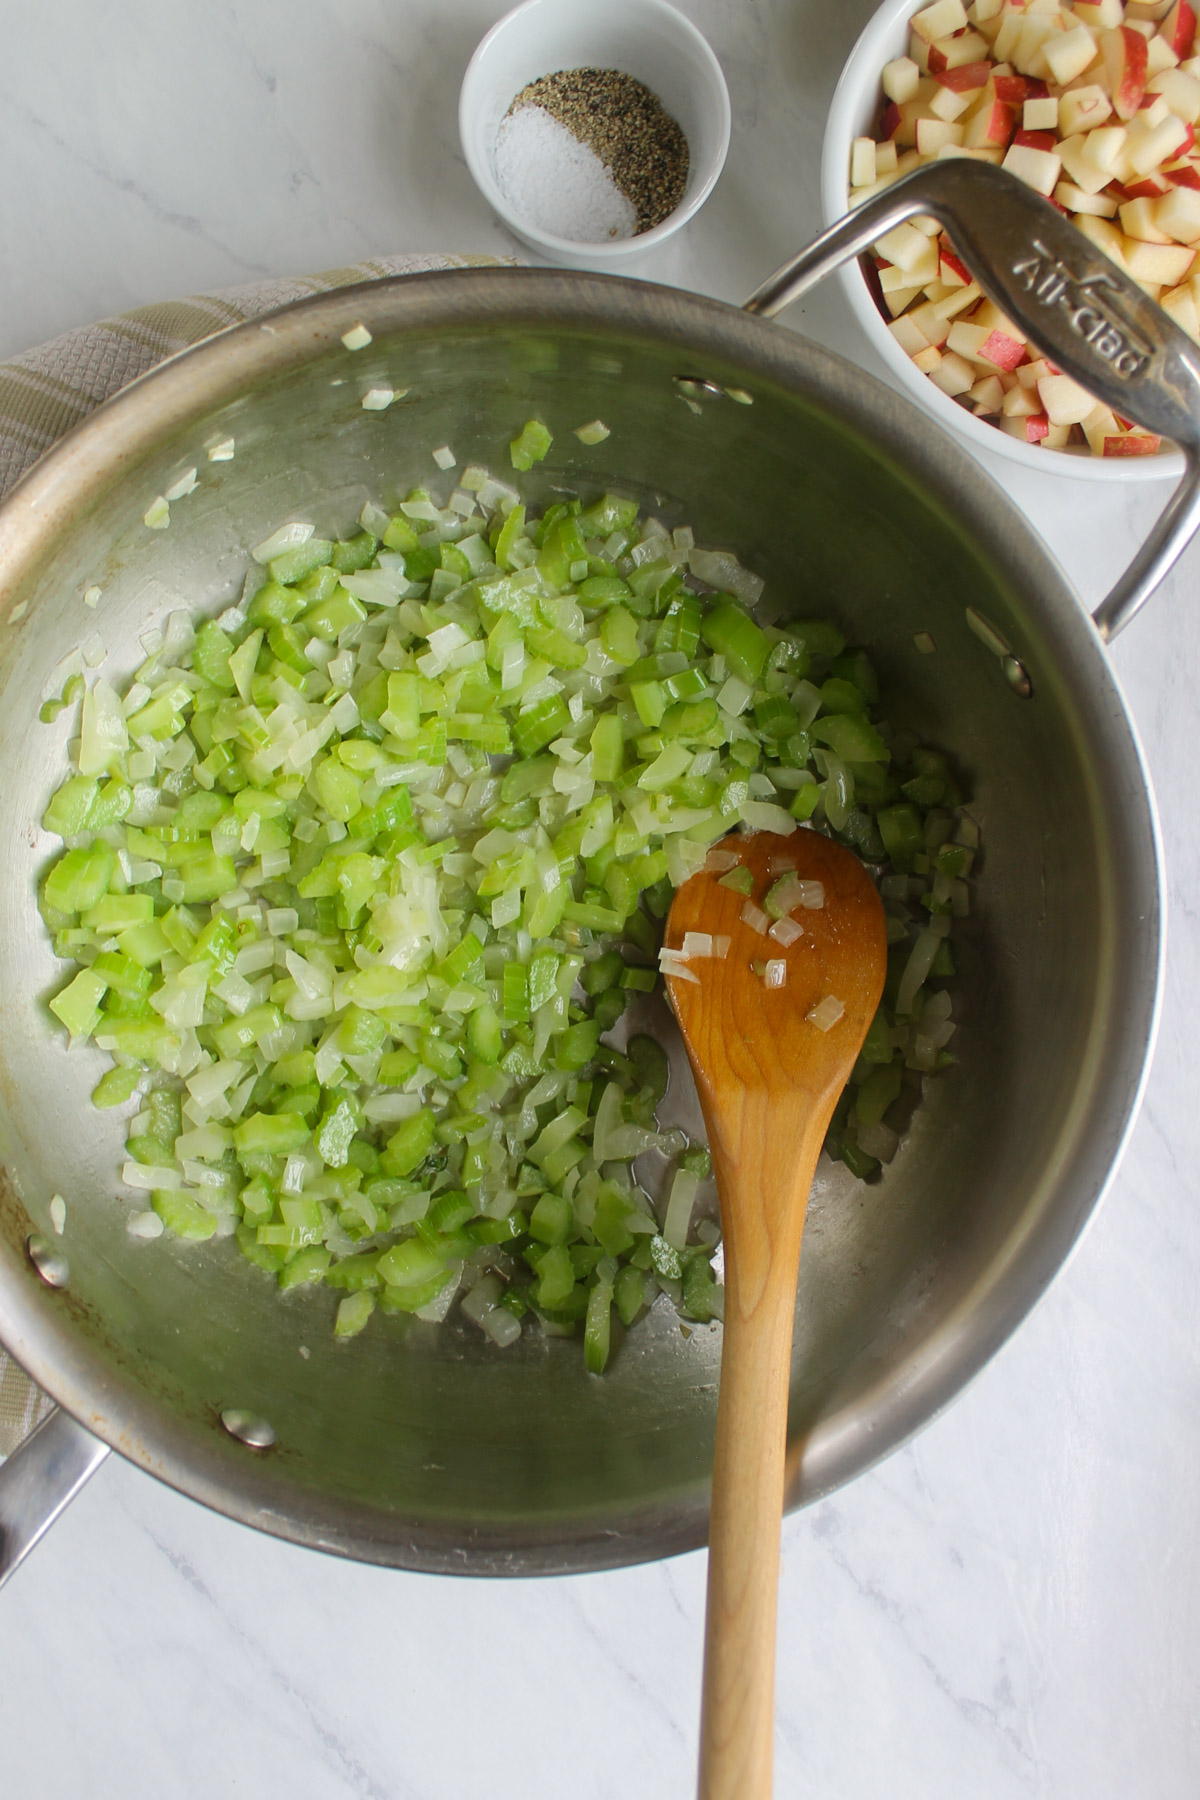 Onions and celery sautéing in a skillet with a wooden spoon.